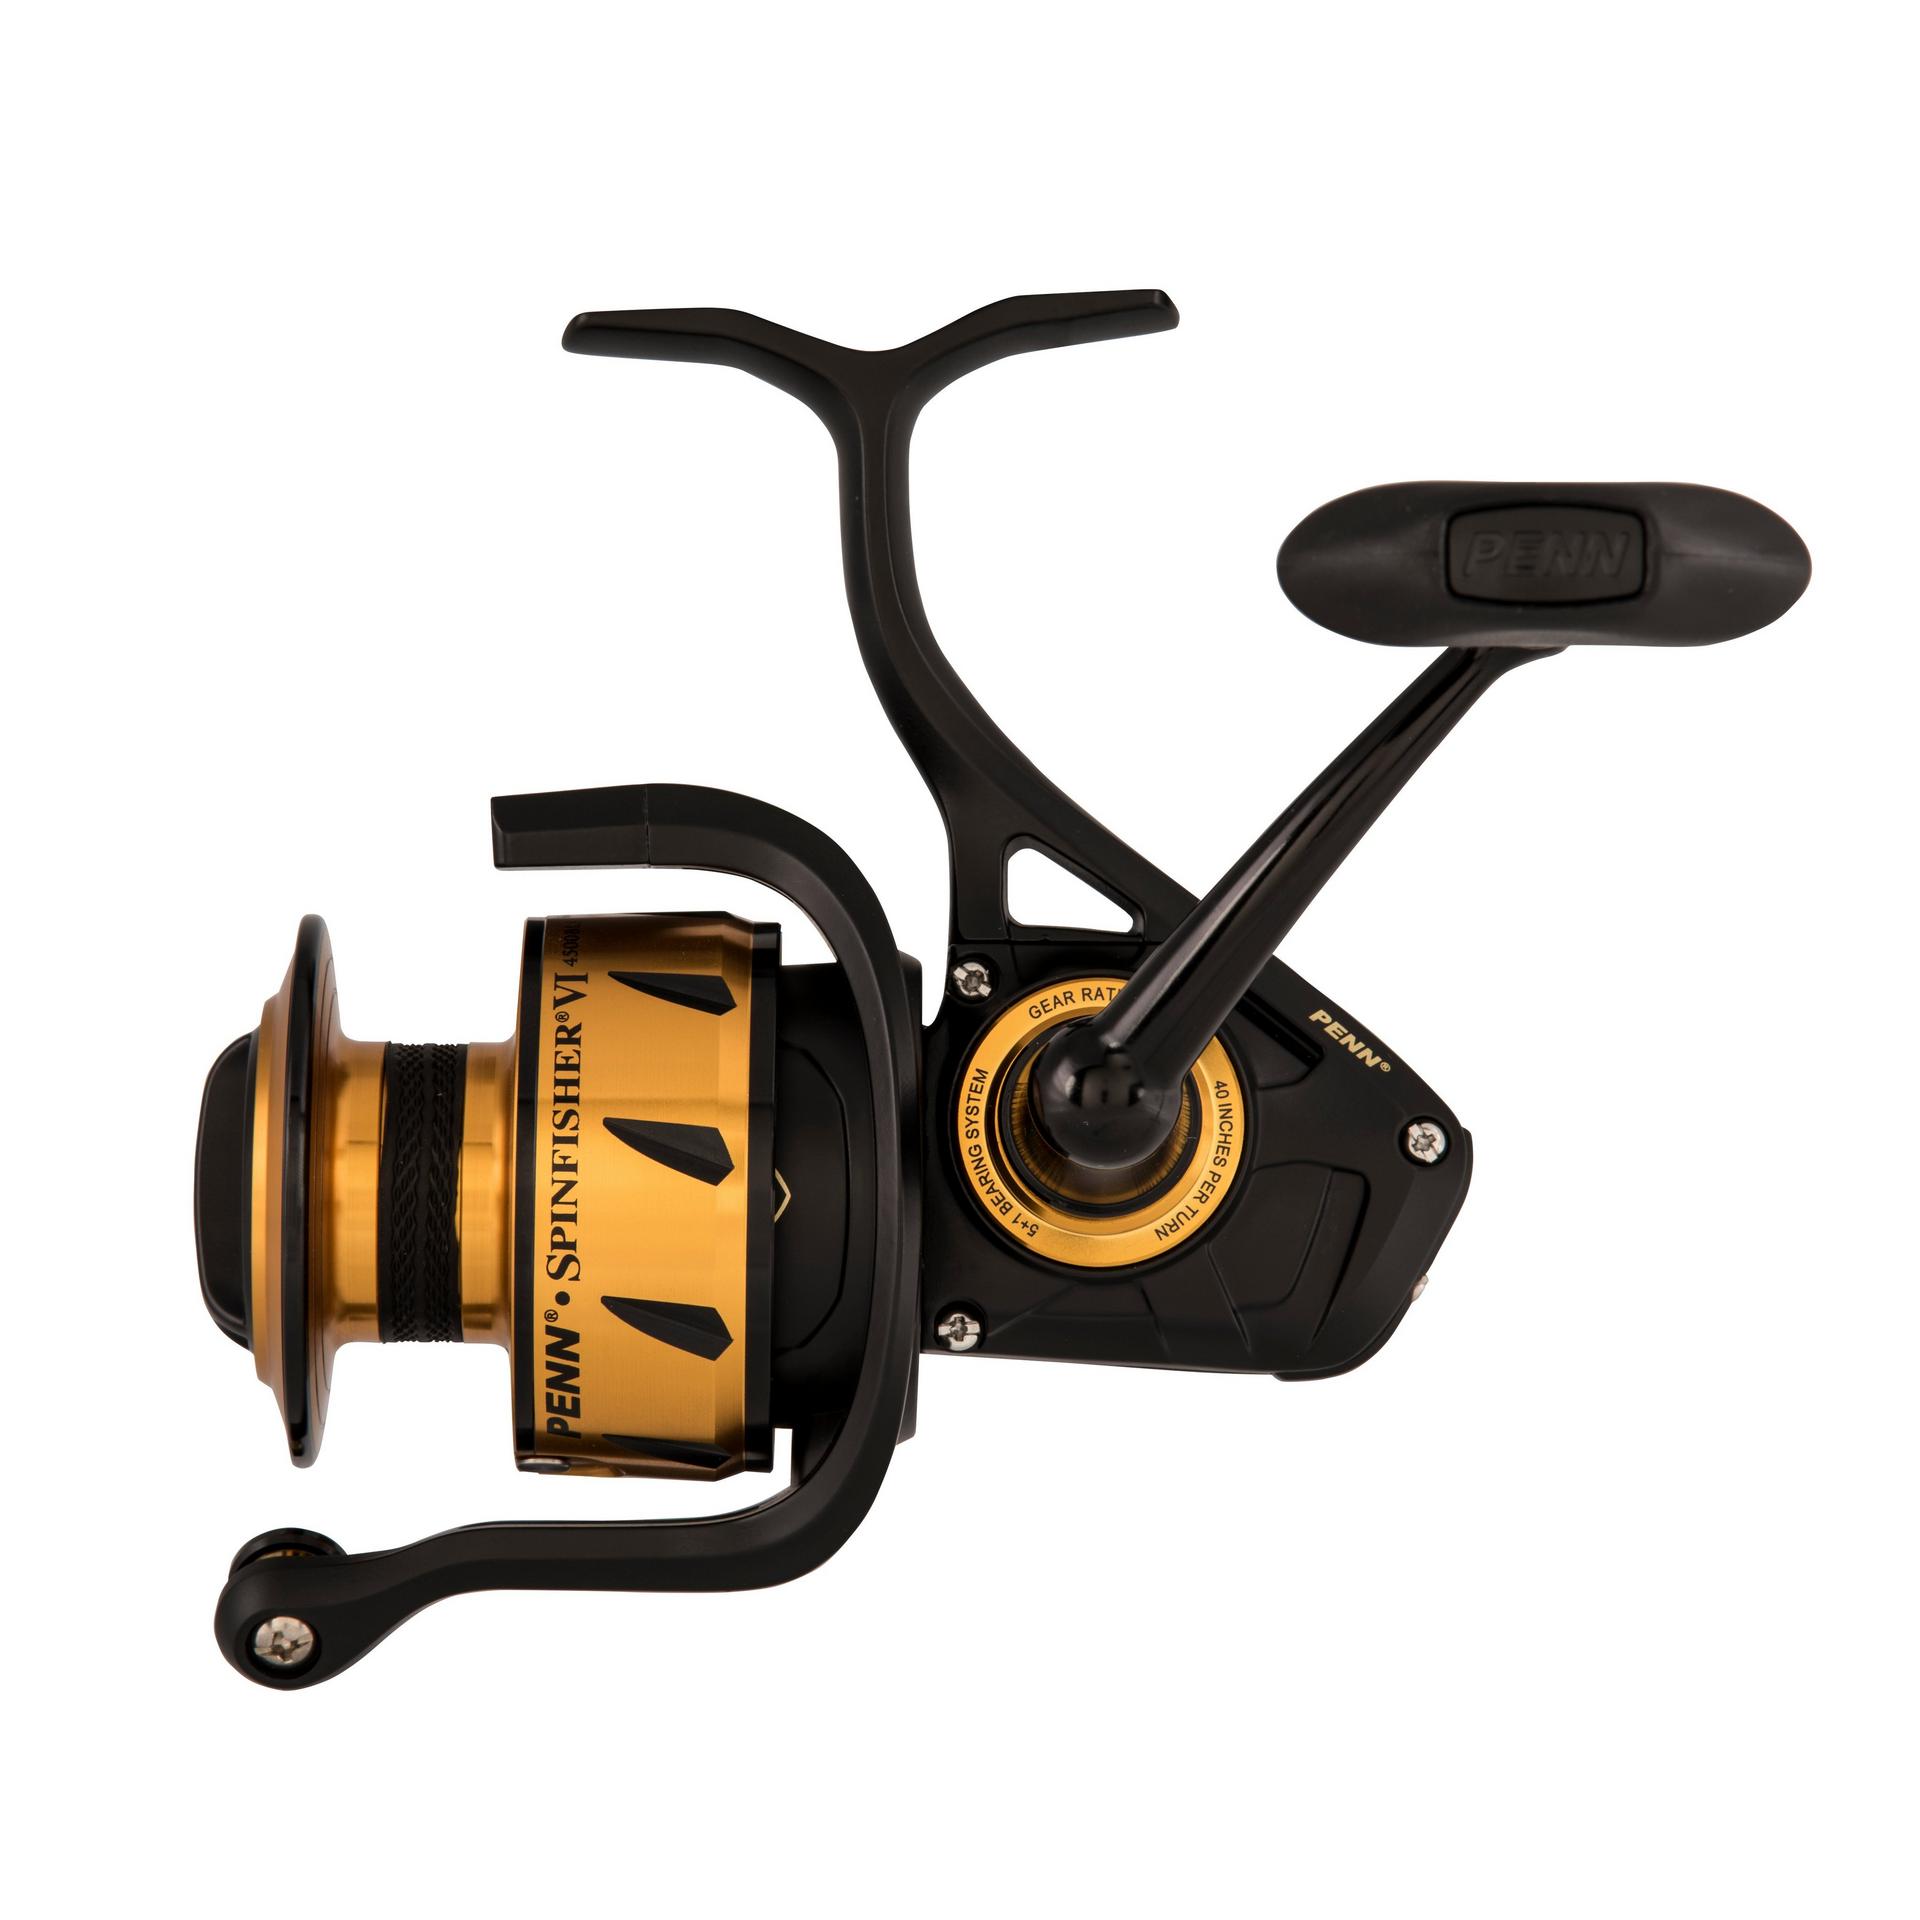 Penn SpinFisher V4500 with a unique sticking problem Diagnosis and